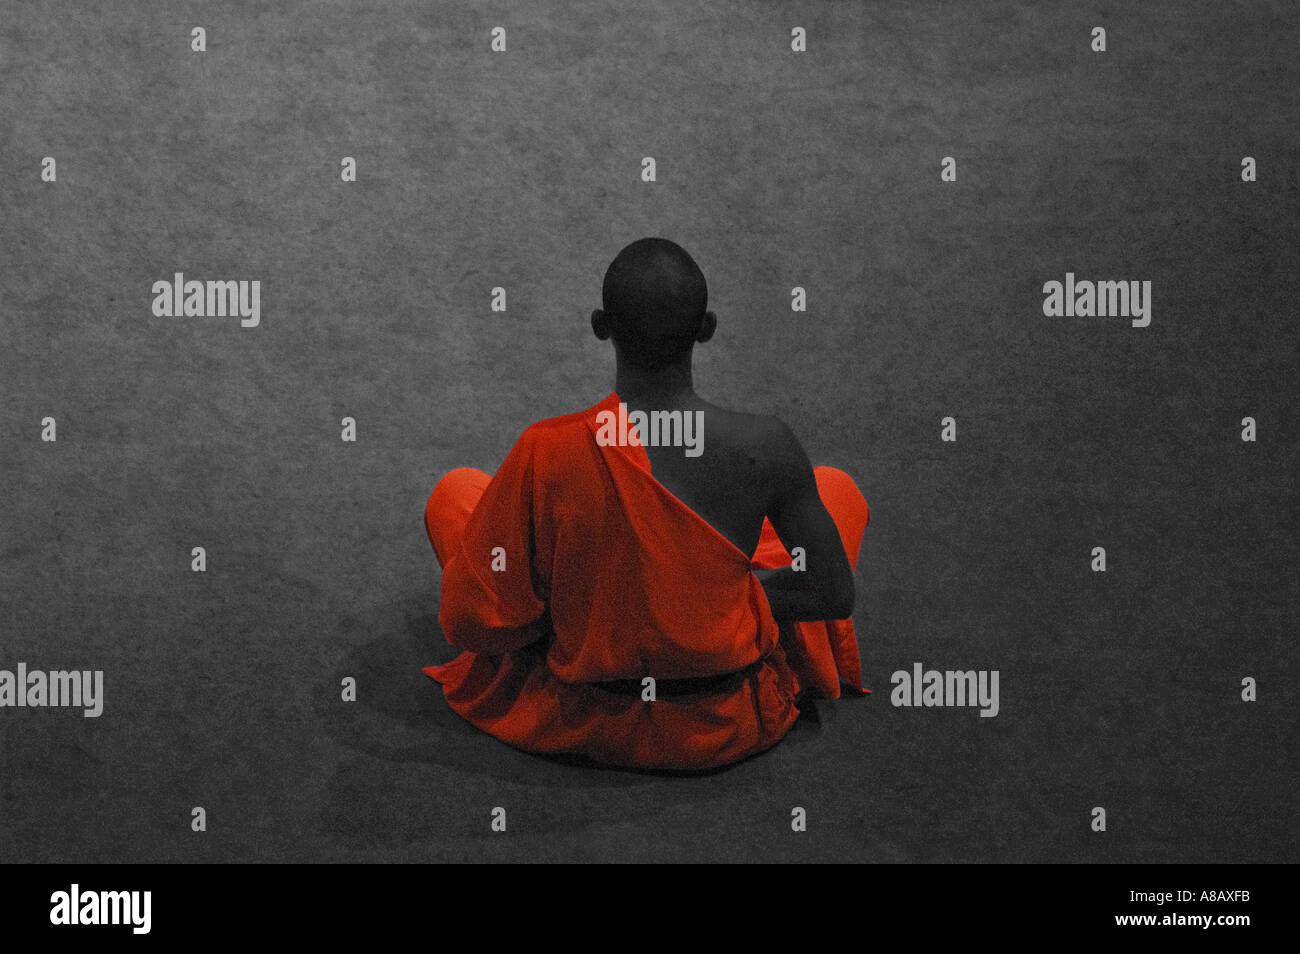 Monochrome image of Buddhist monk sitting in meditation with his orange robe selectively highlighted Stock Photo